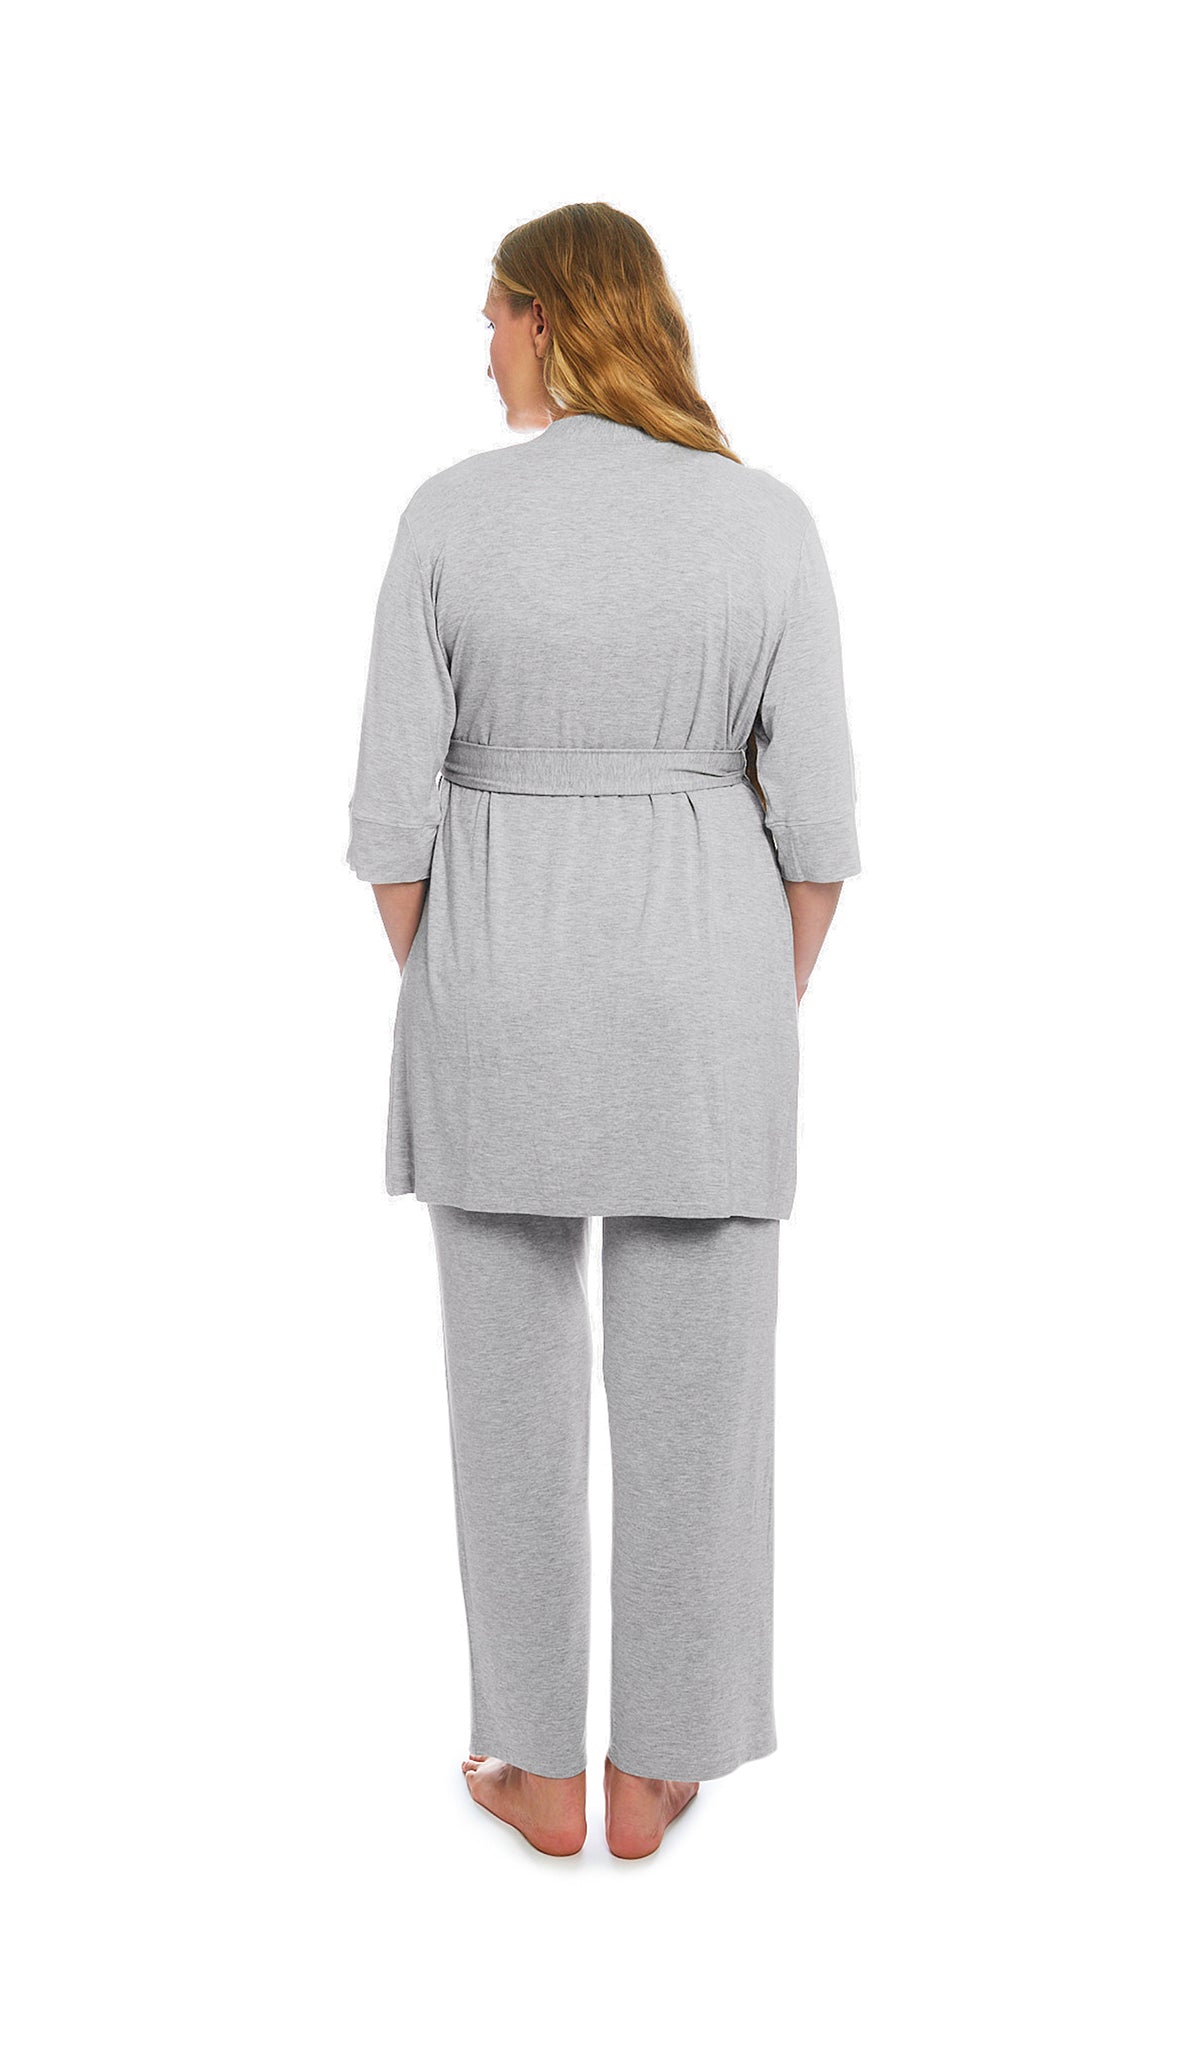 Heather Grey Solid Analise 5-Piece Set, back shot of woman wearing robe and pant.